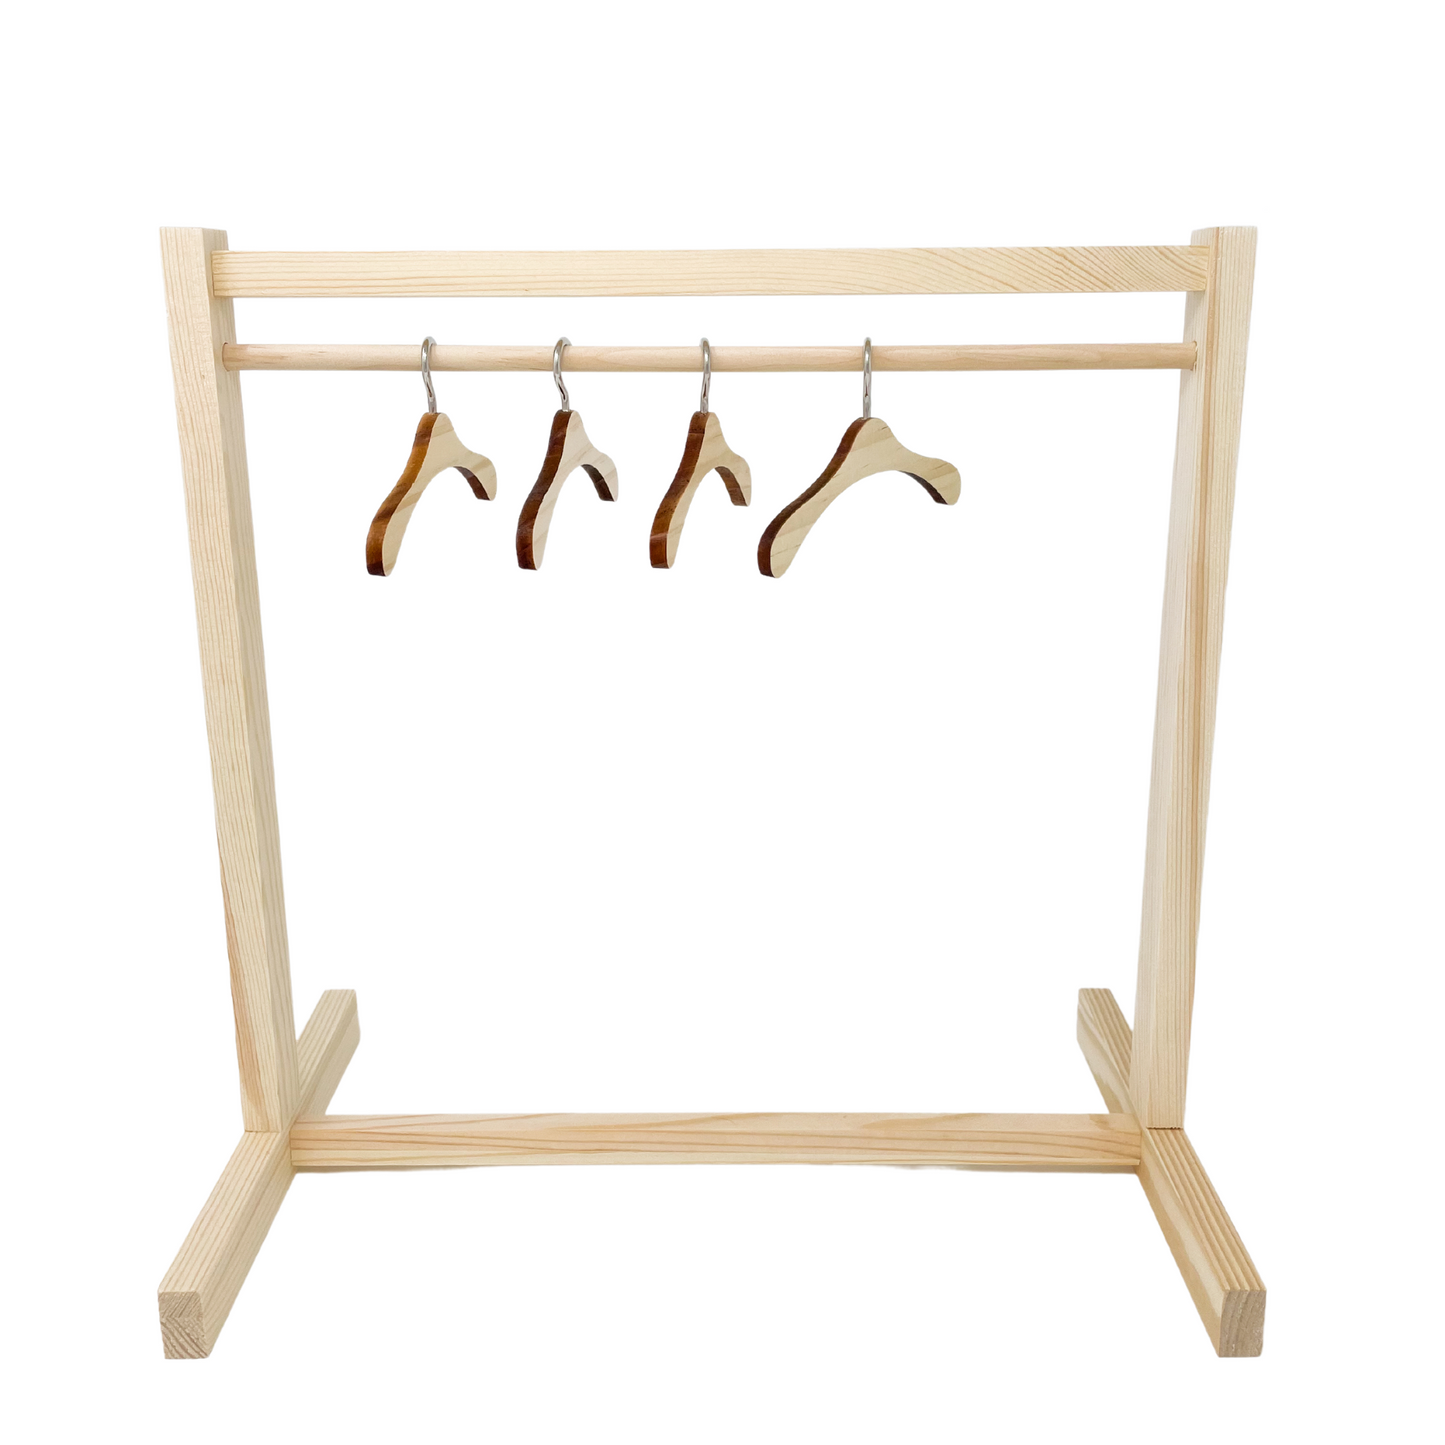 Wooden Doll Clothing Rack with Miniature Hangers